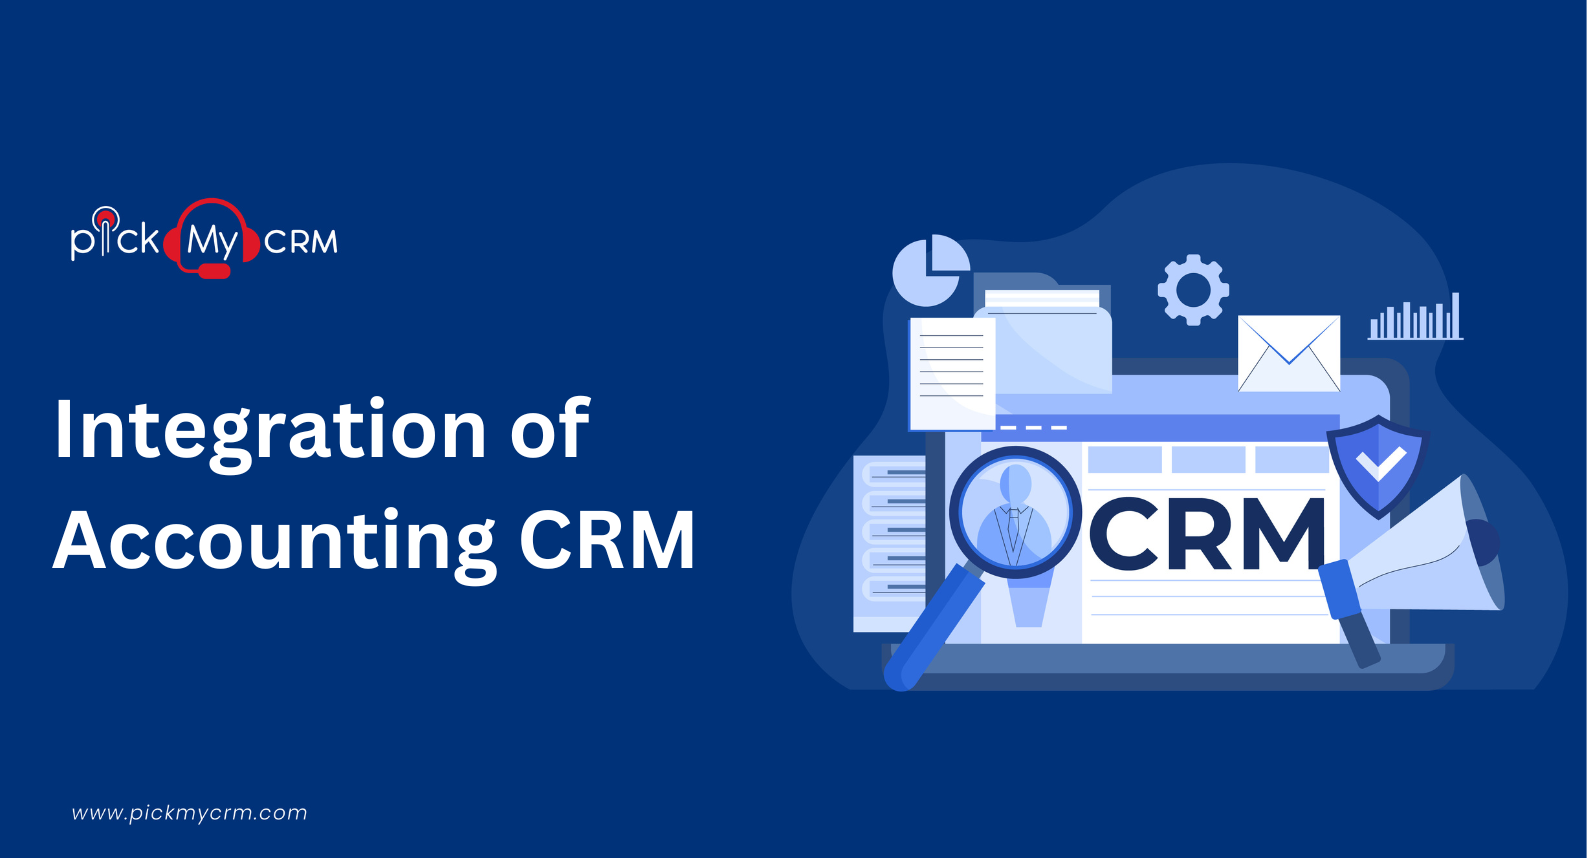 Integration of Accounting CRM